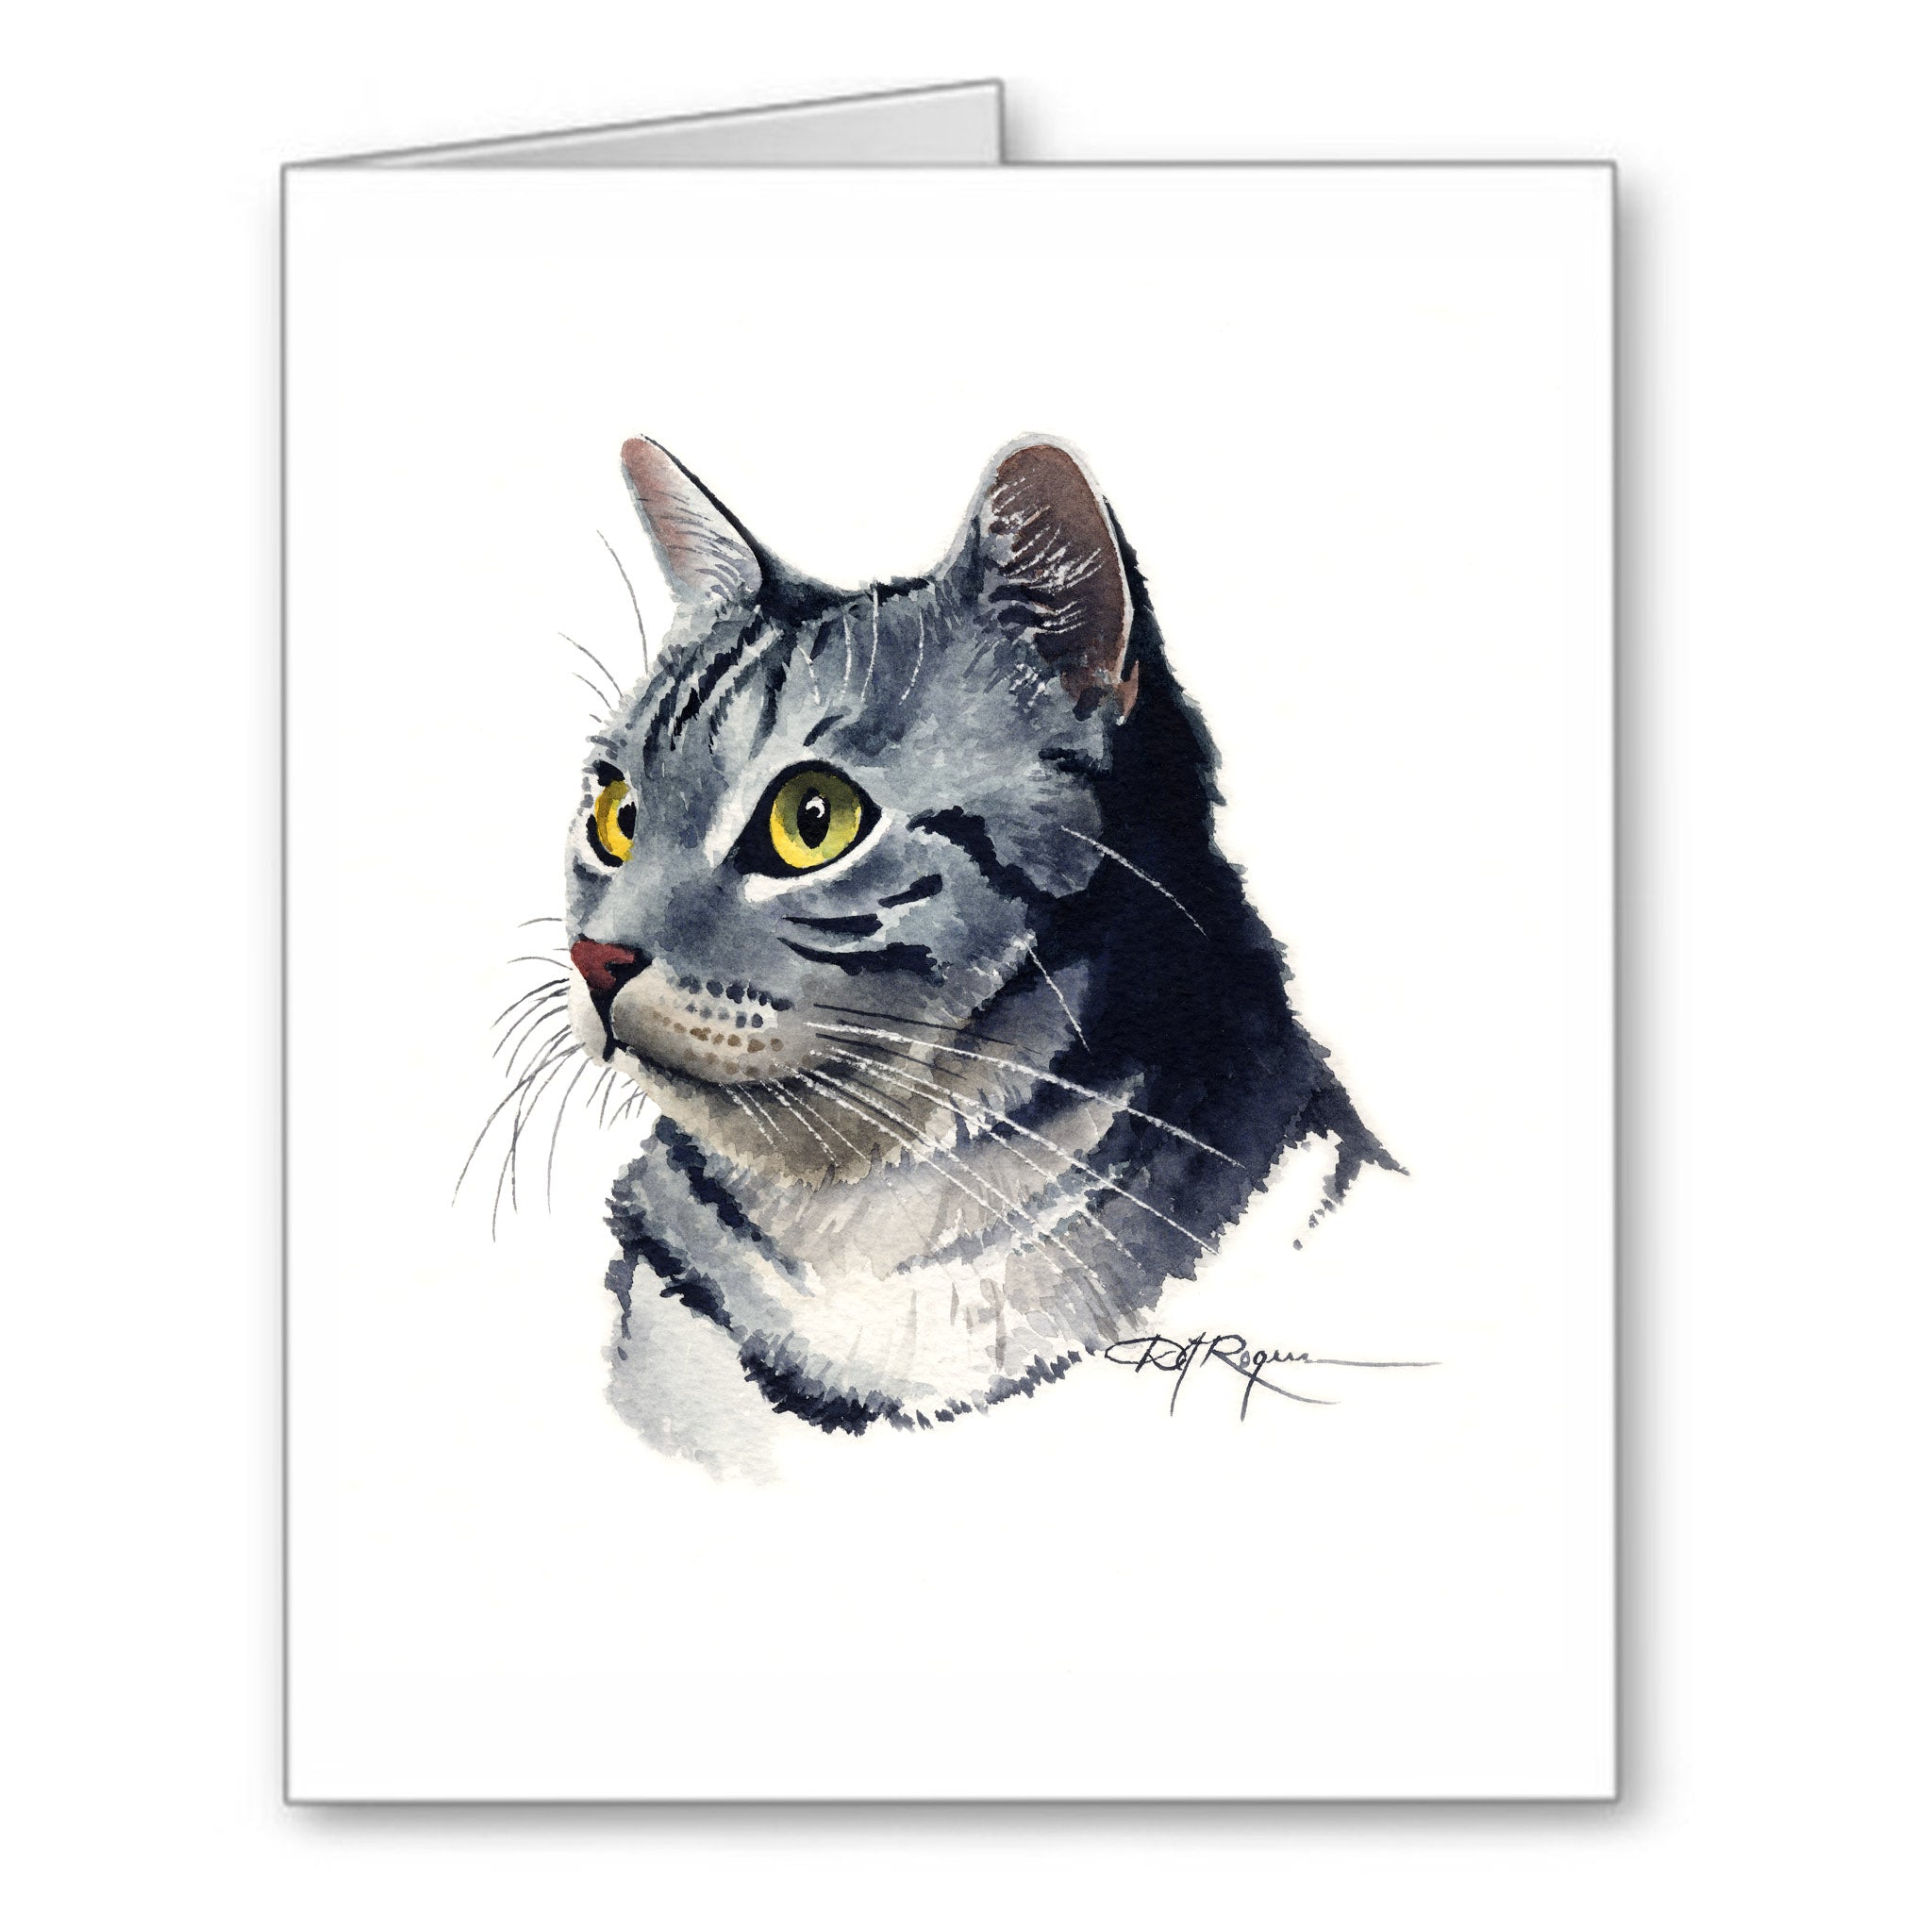 Silver Tabby Cat Traditional Watercolor Note Card Art by Artist DJ Rogers